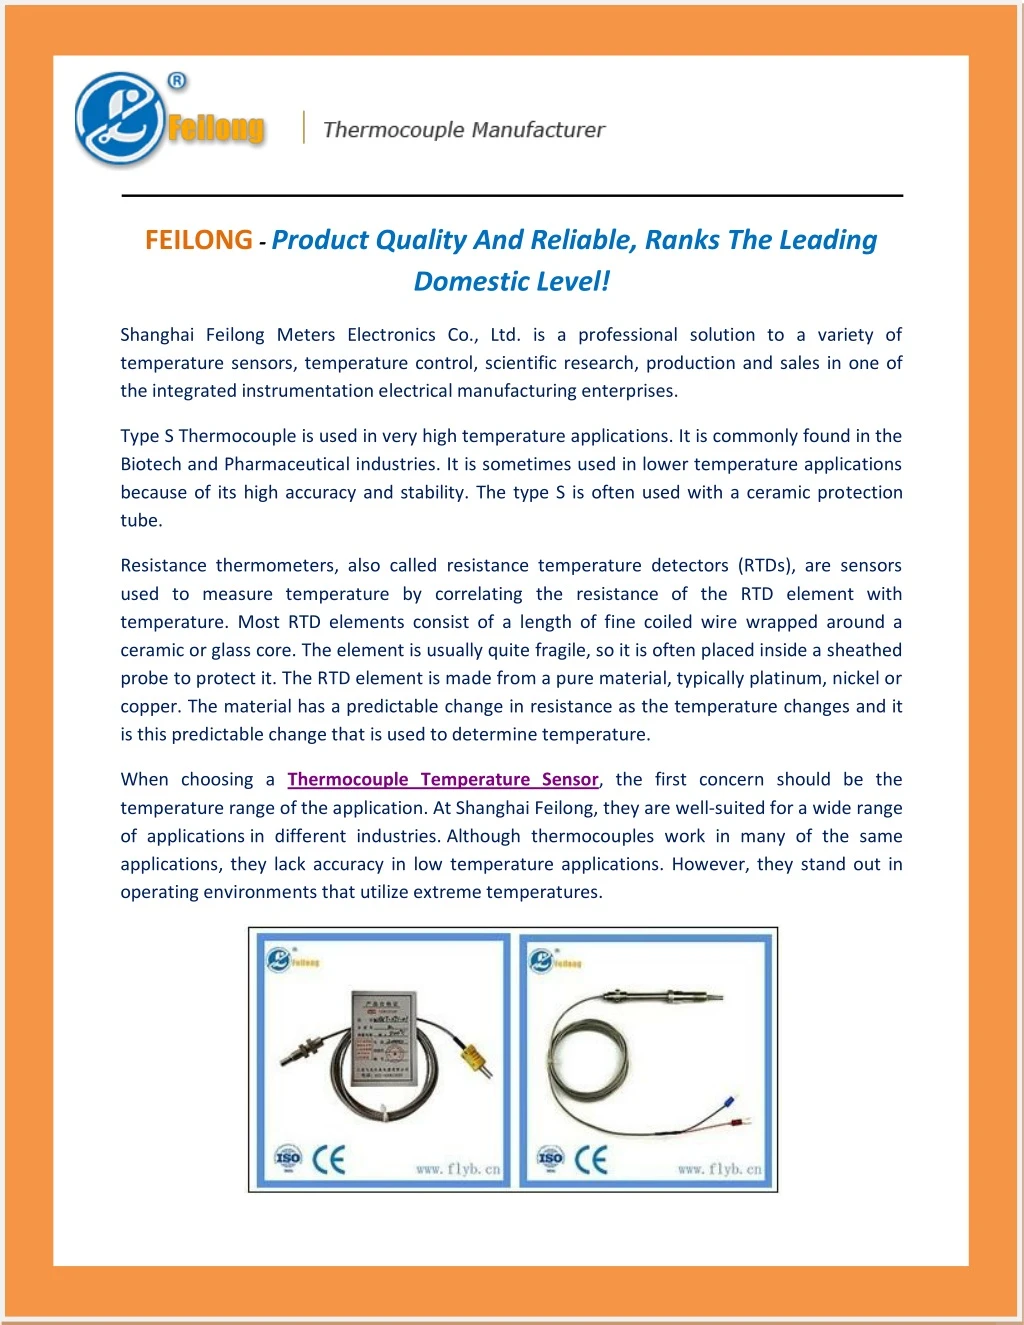 feilong product quality and reliable ranks